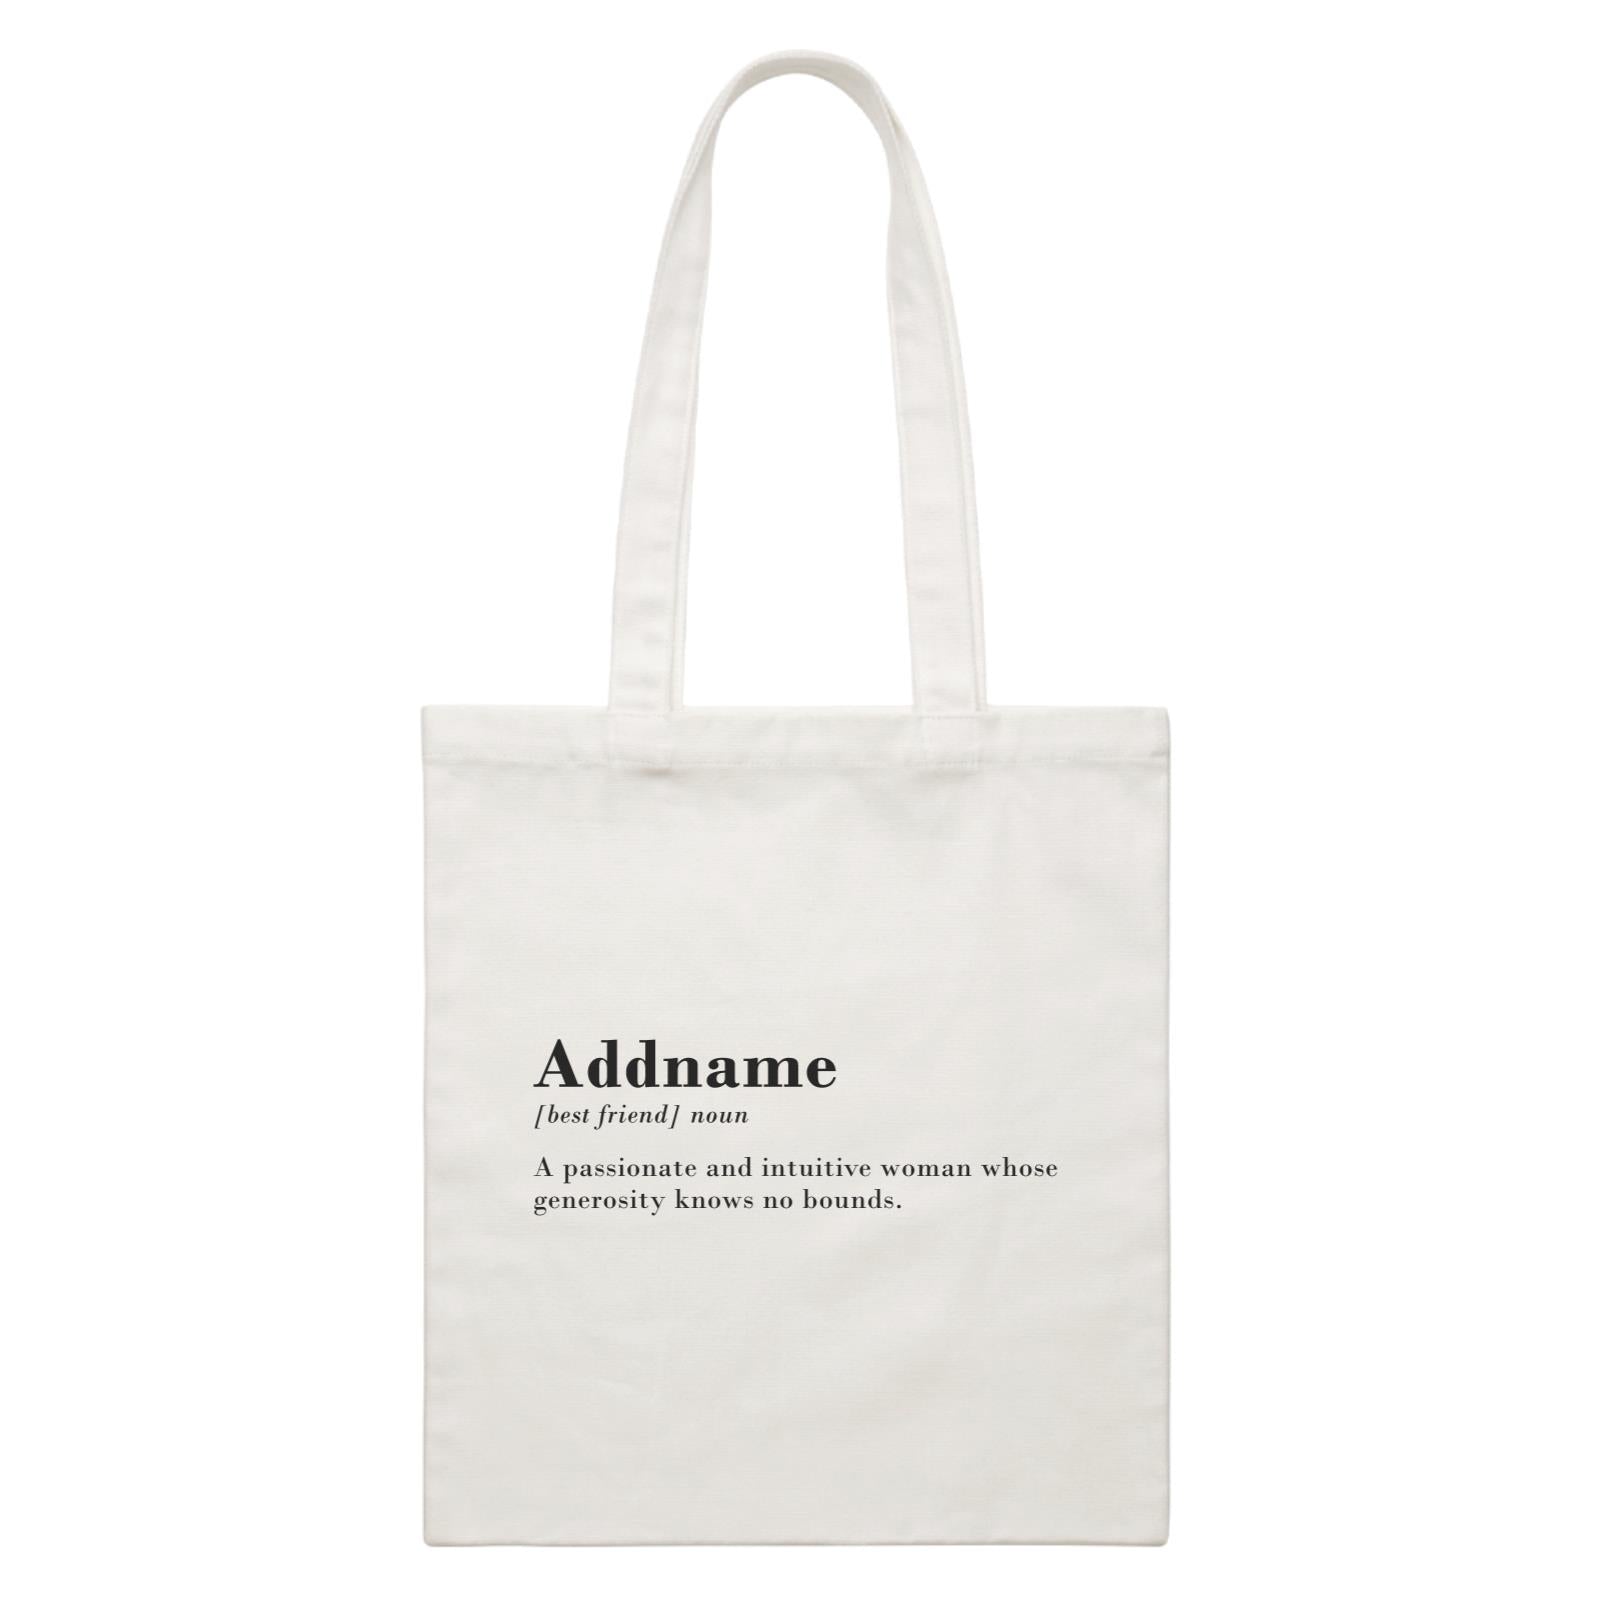 Best Friends Quotes Addname Best Friend Noun A Passionate And Intuitive Woman White Canvas Bag